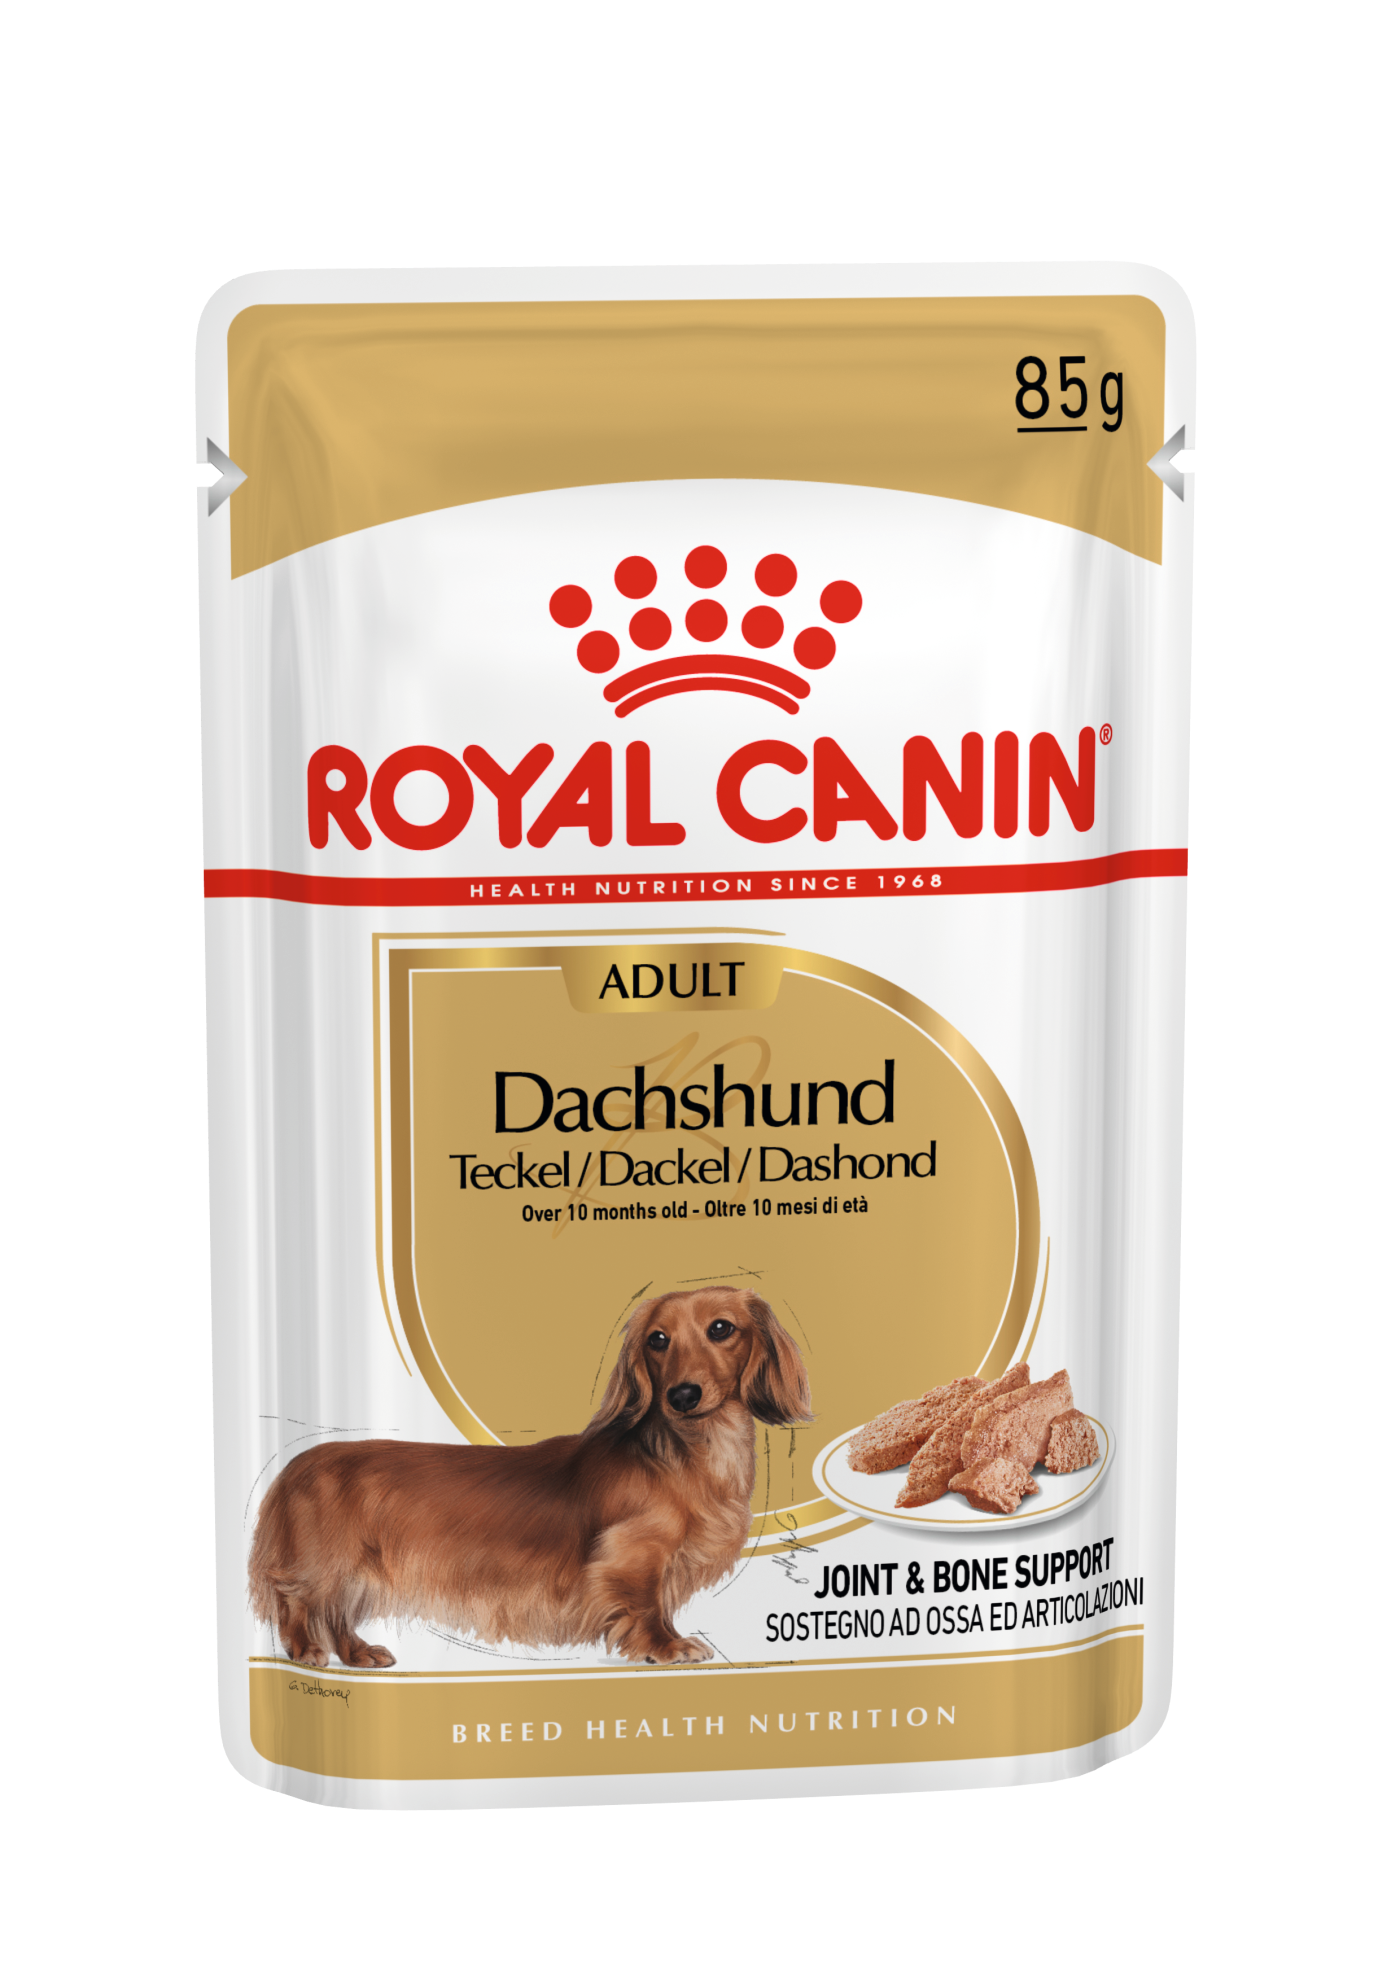 royal canin breed specific dog food